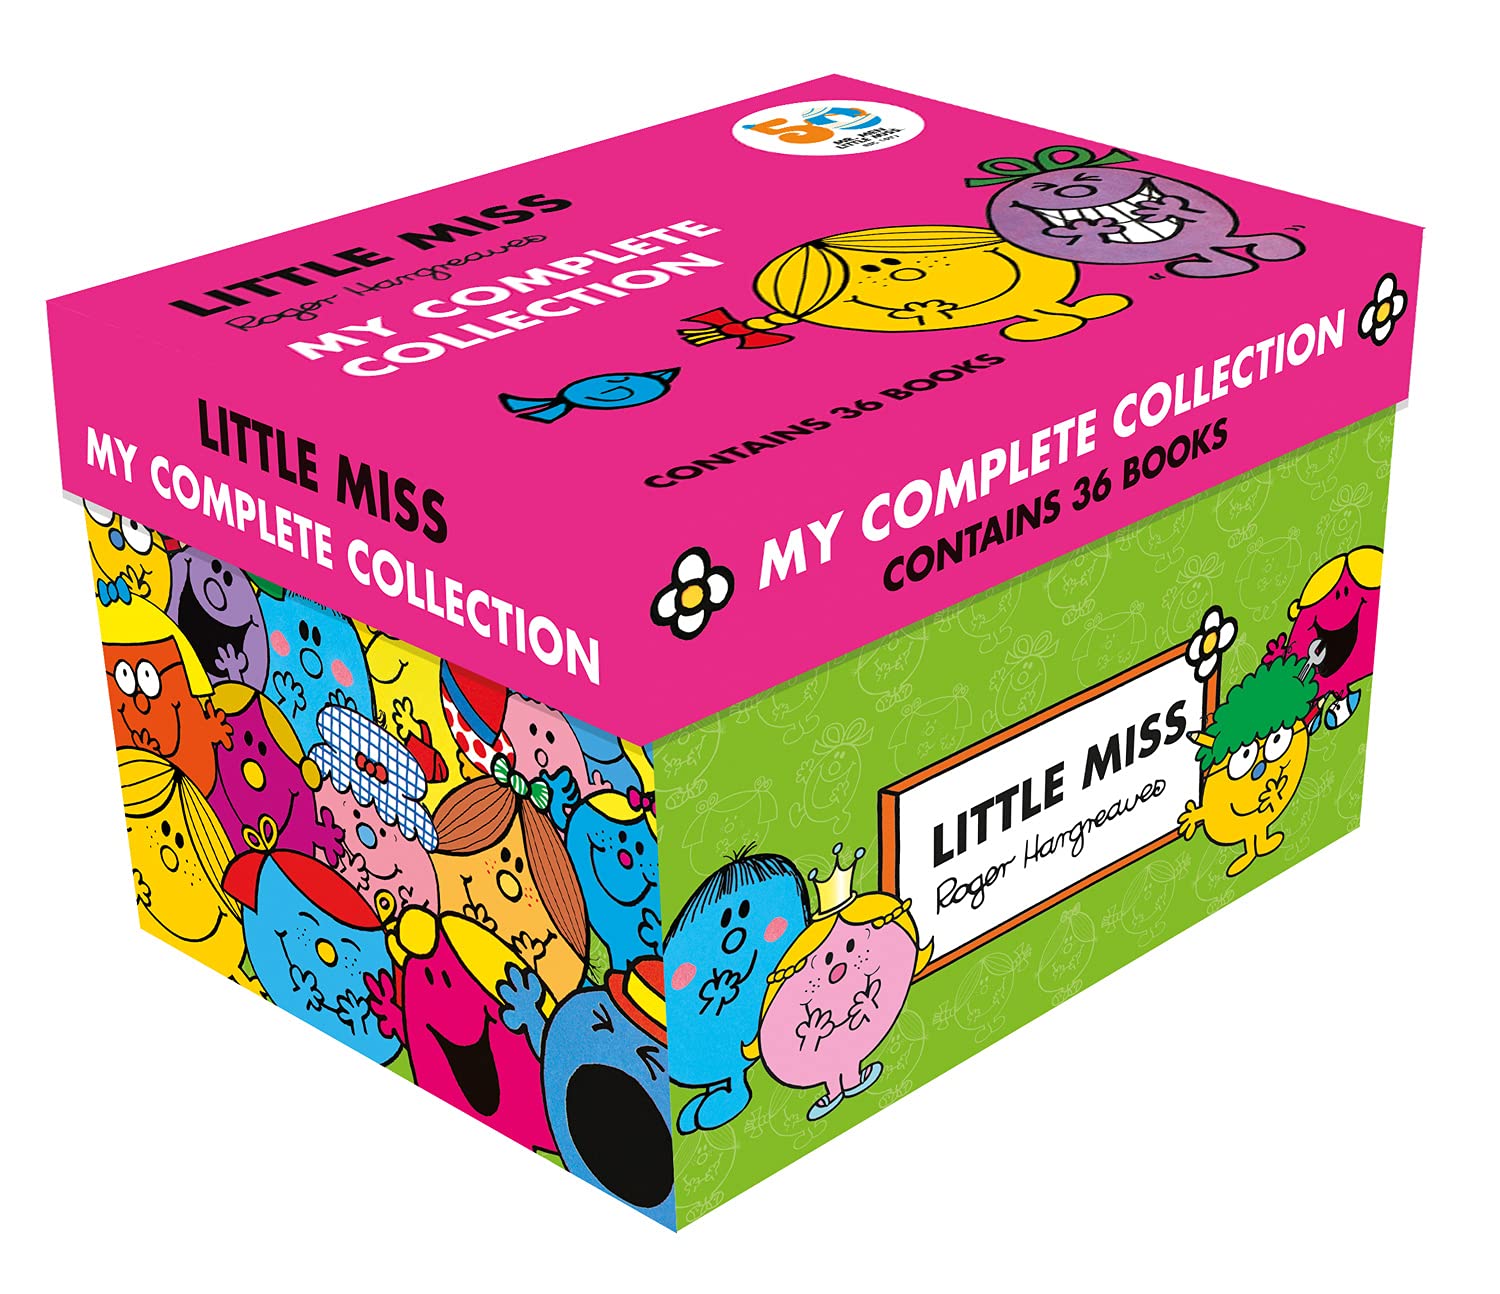 Little Miss: My Complete Collection Box Set : All 36 Little Miss Books in One Fantastic Collection (Multiple-component retail product, loose)